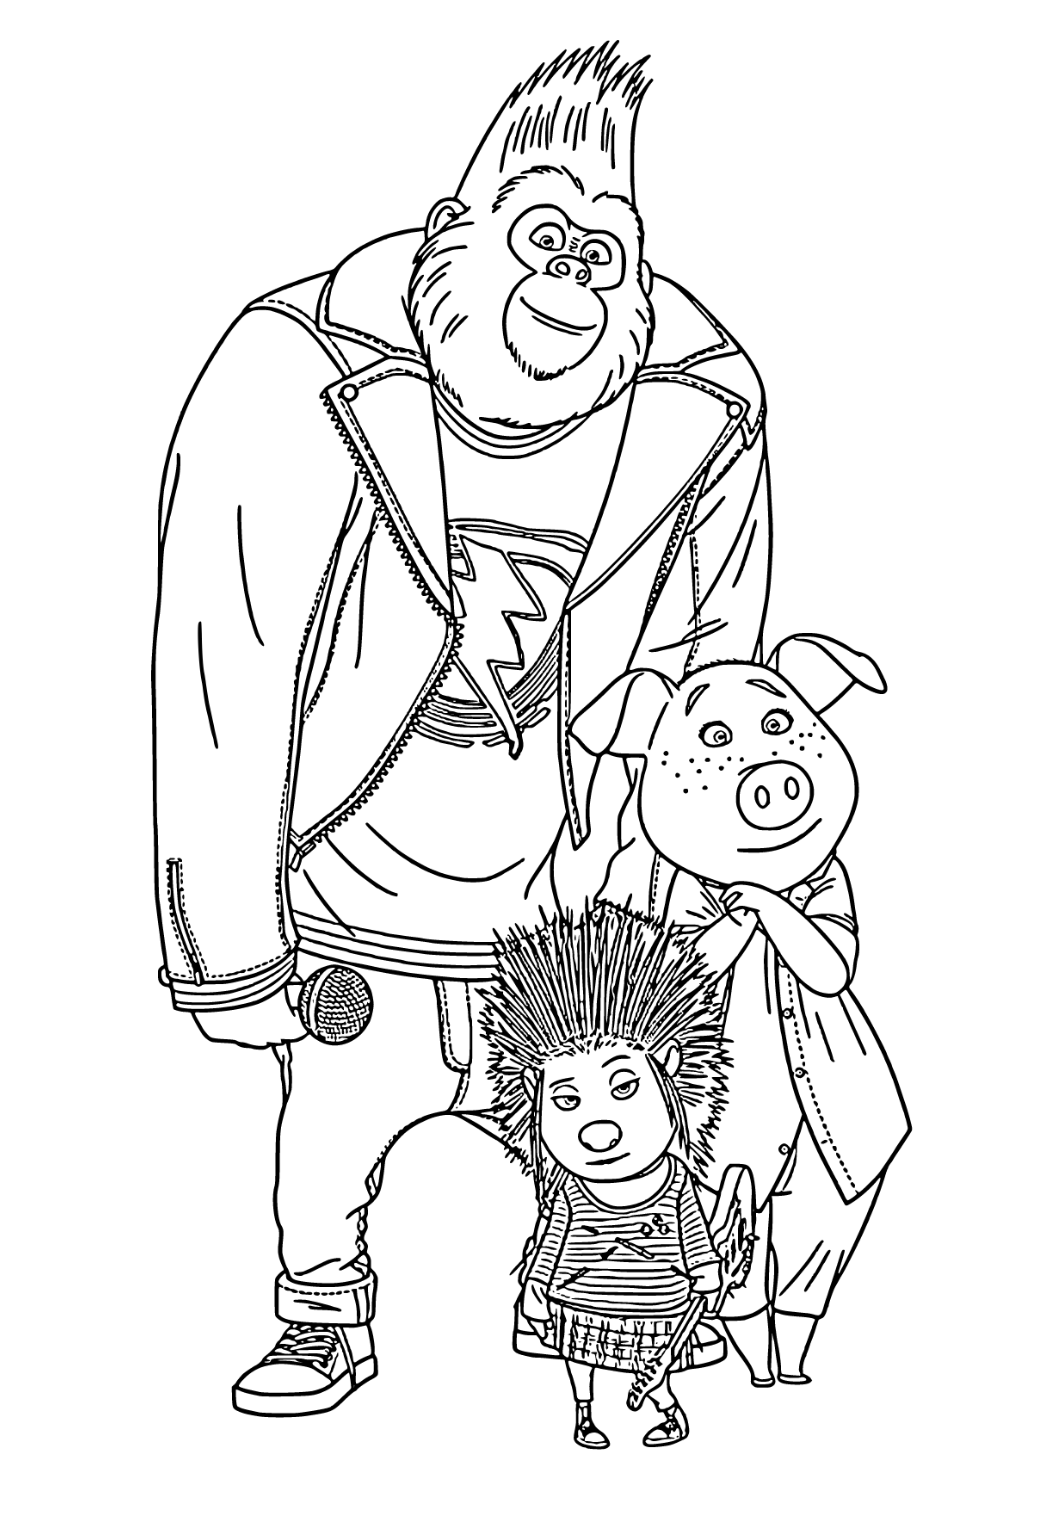 Free printable sing characters coloring page for adults and kids